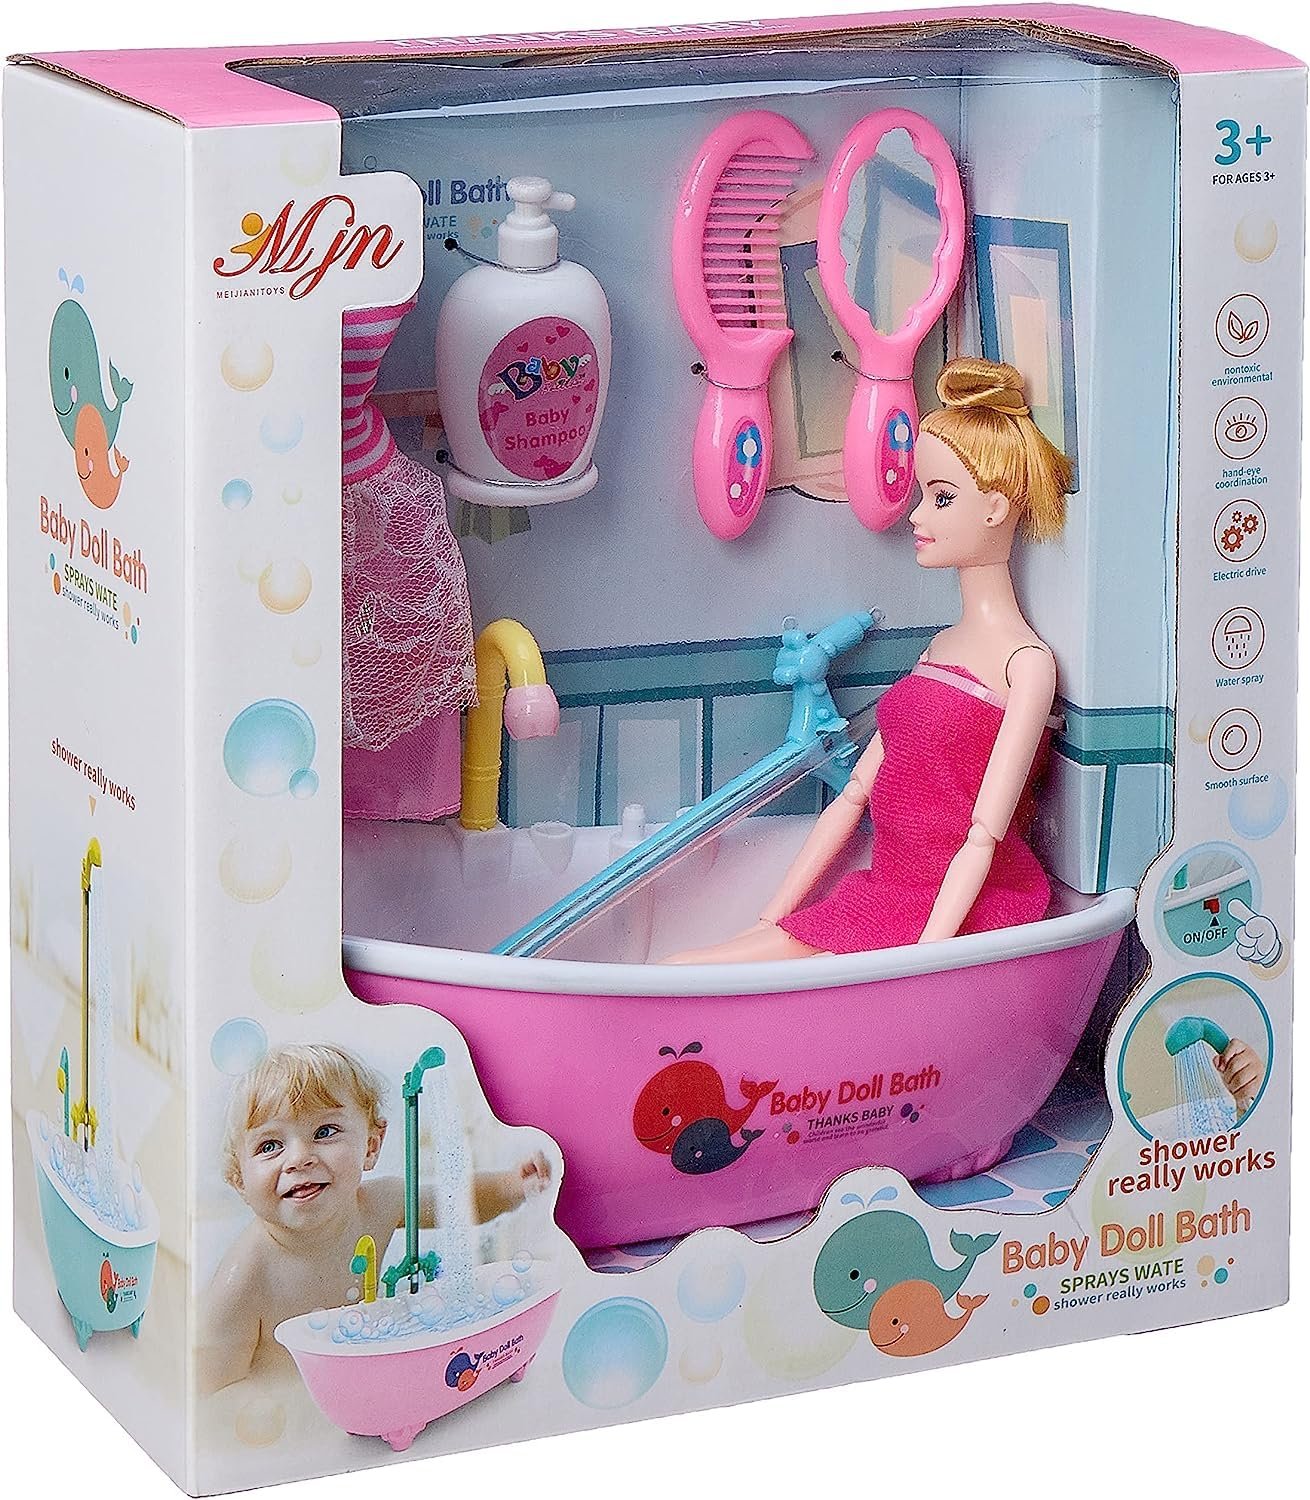 Doll Play Sets Online in India, Toys